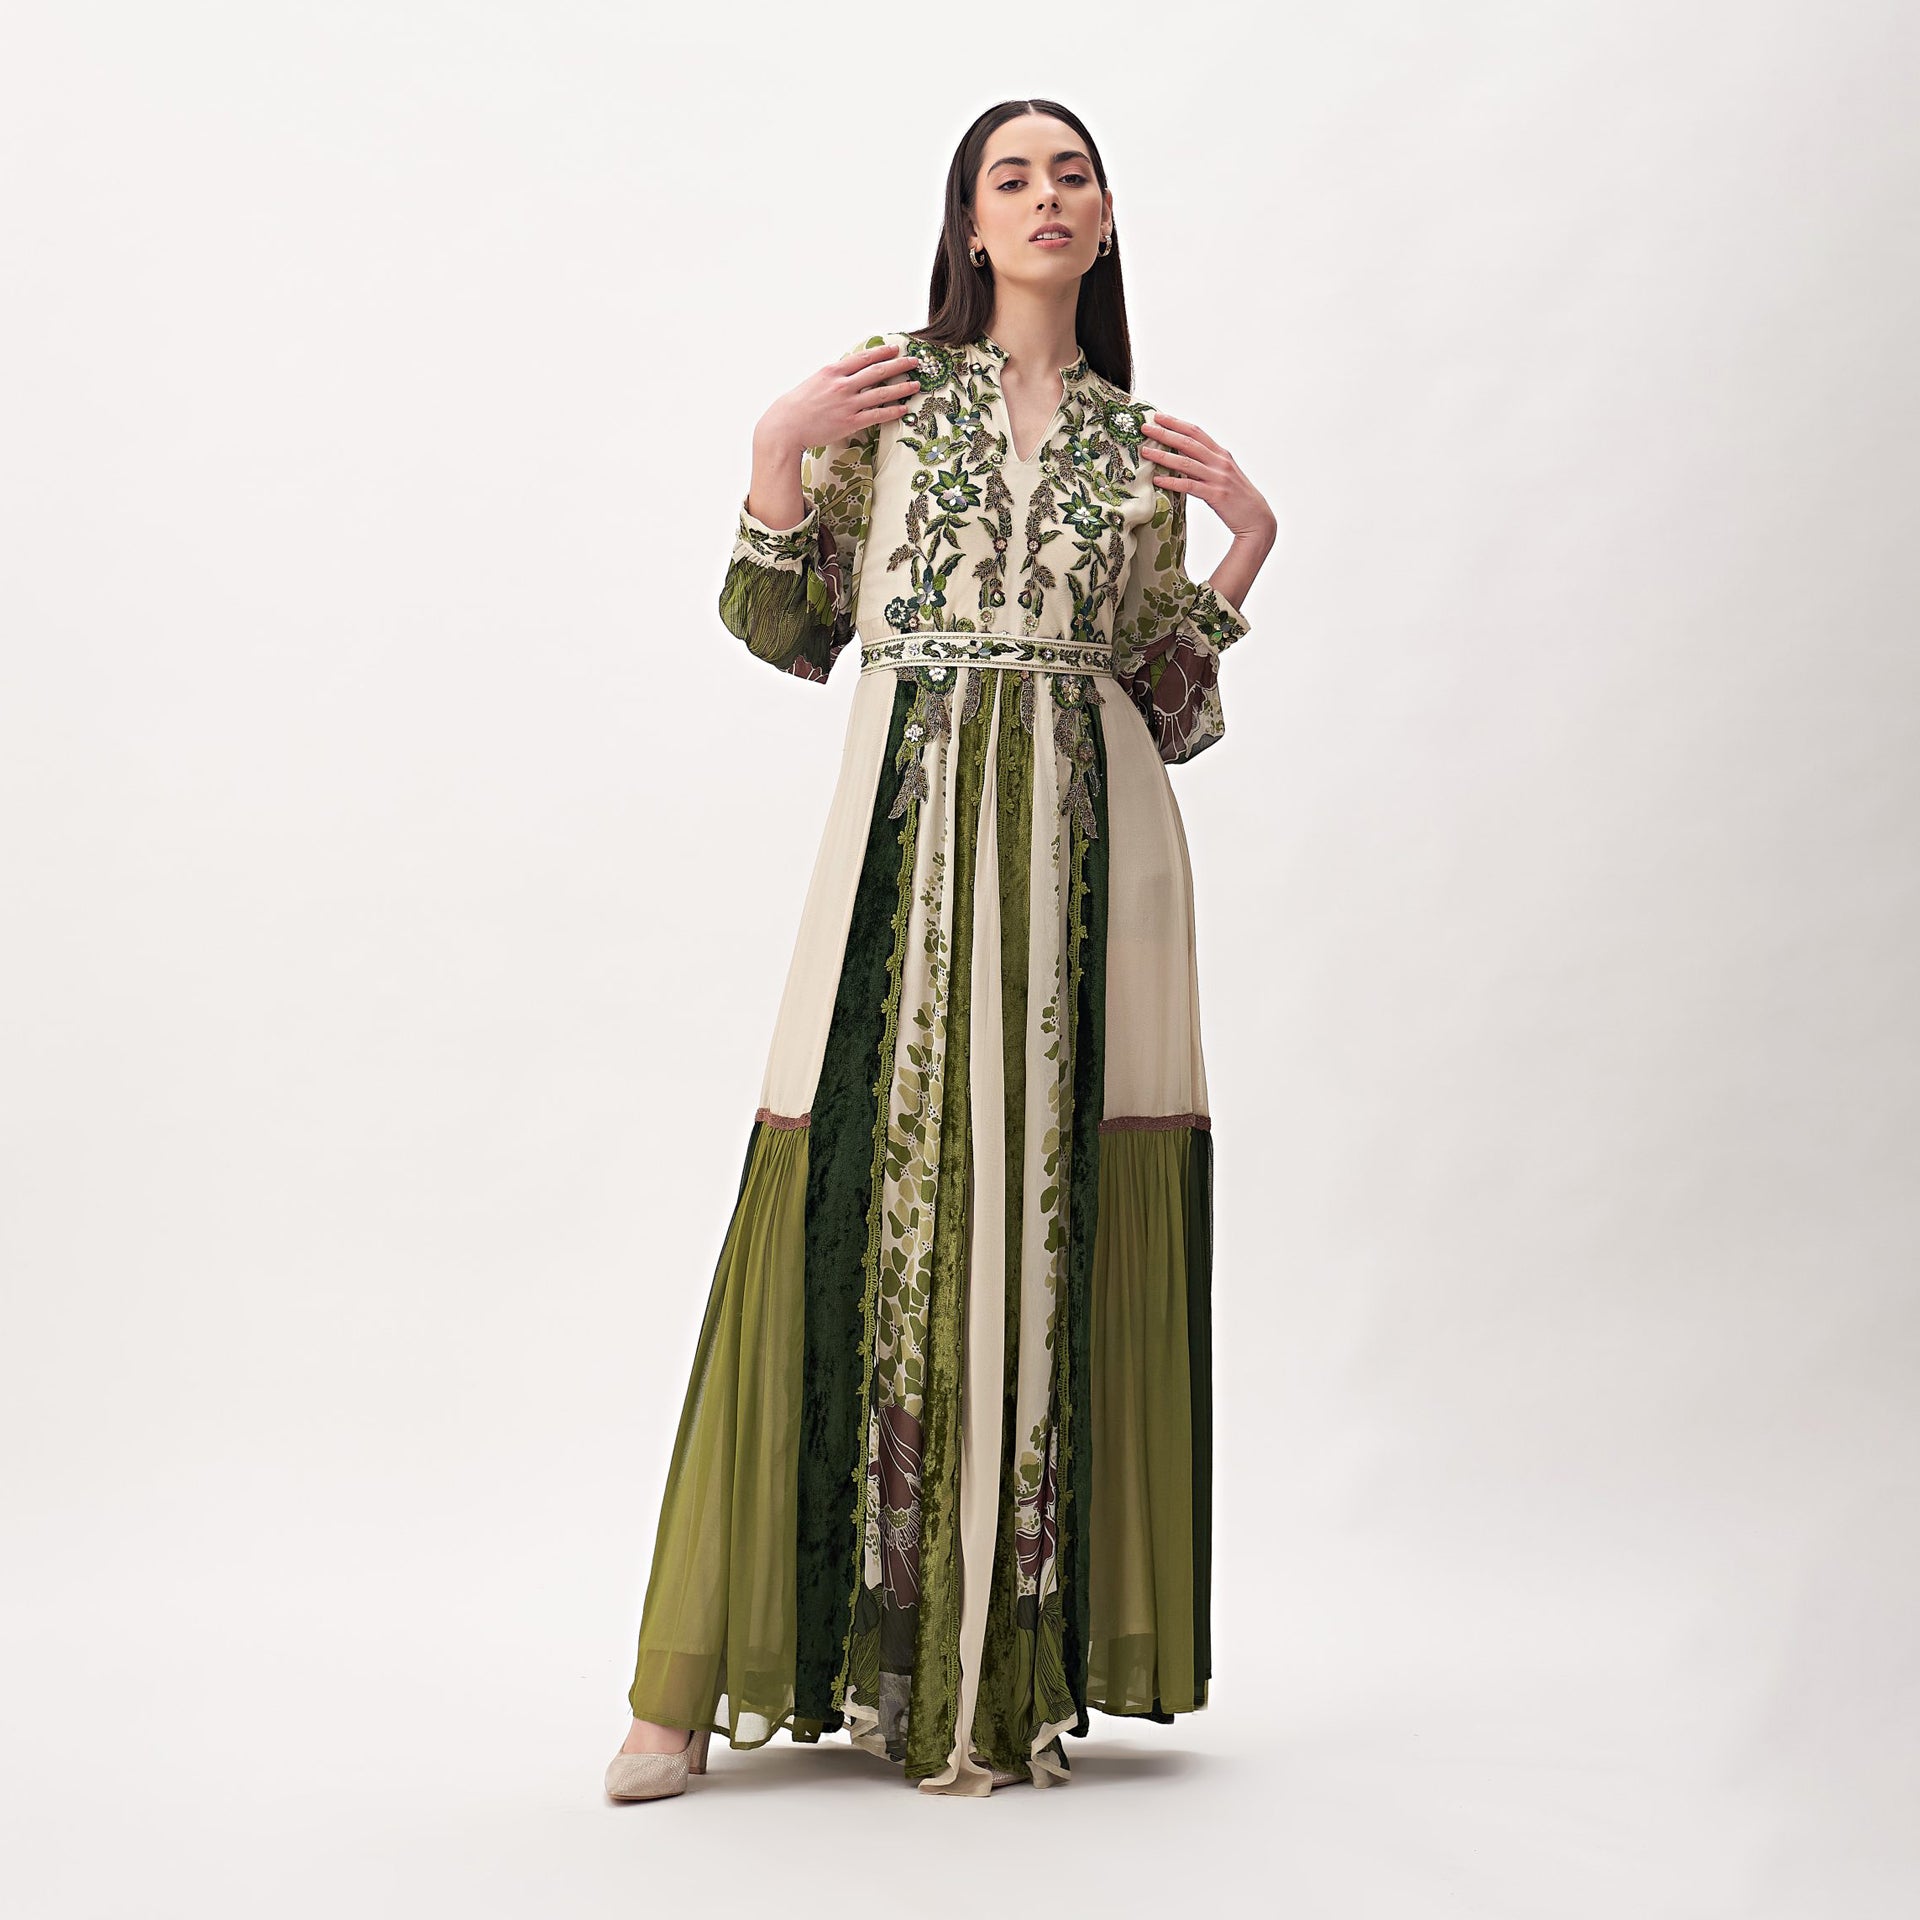 Beige And Olive Green Embroidery Rosetta Dress With Long Sleeves From Shalky